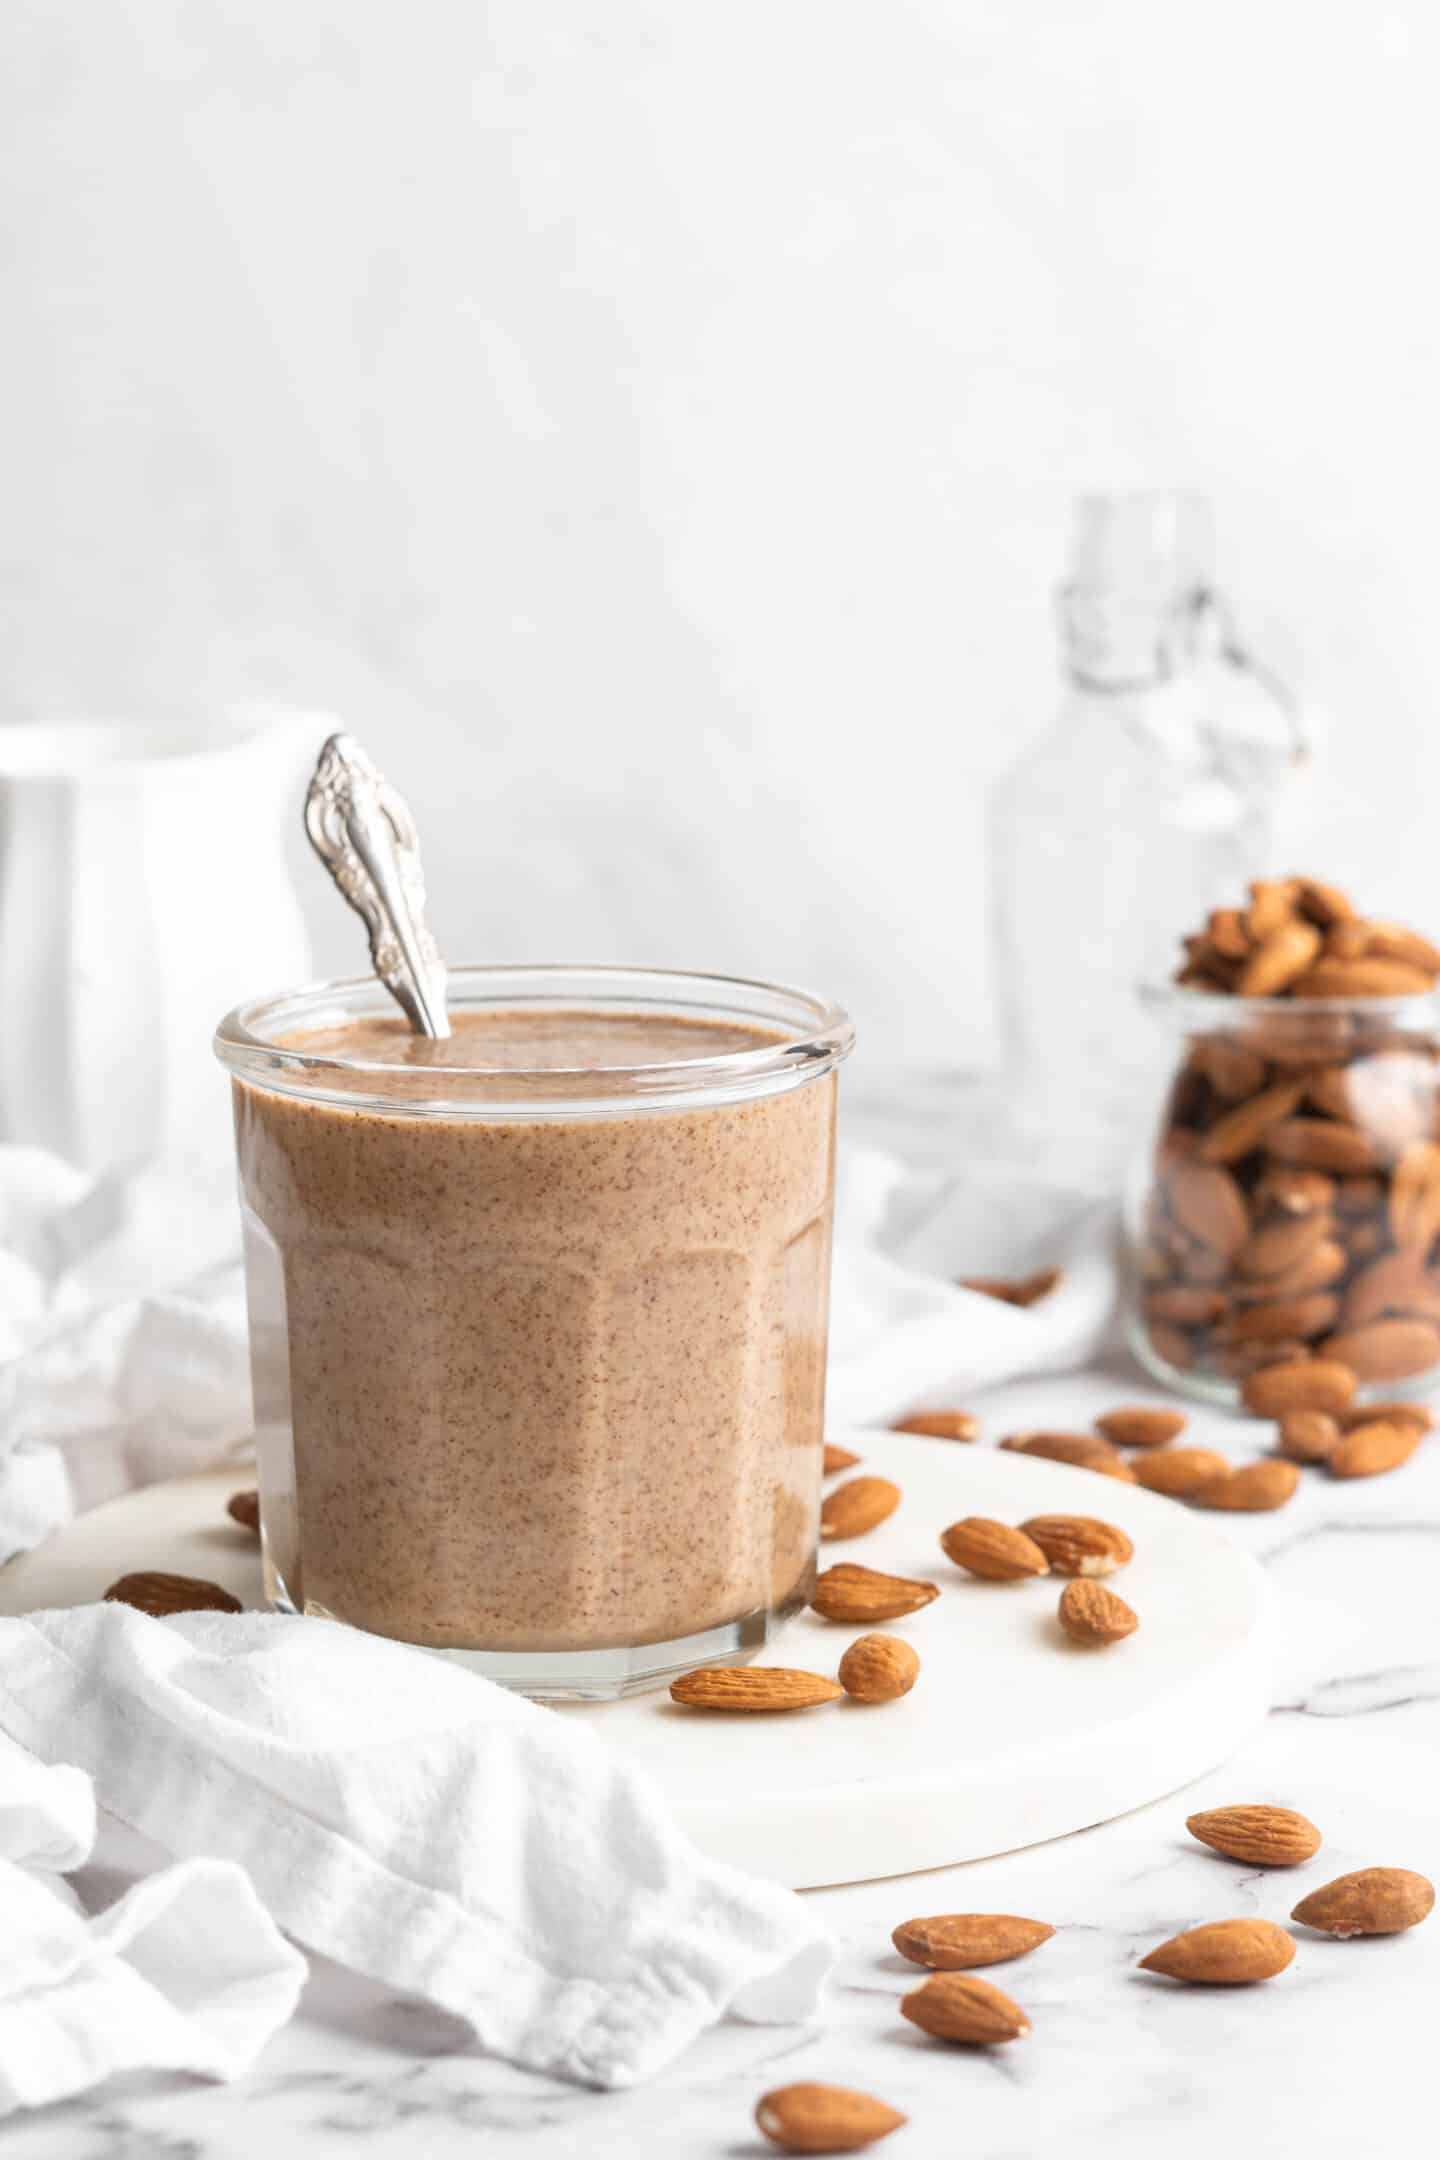 Jar of homemade almond butter with almonds in background